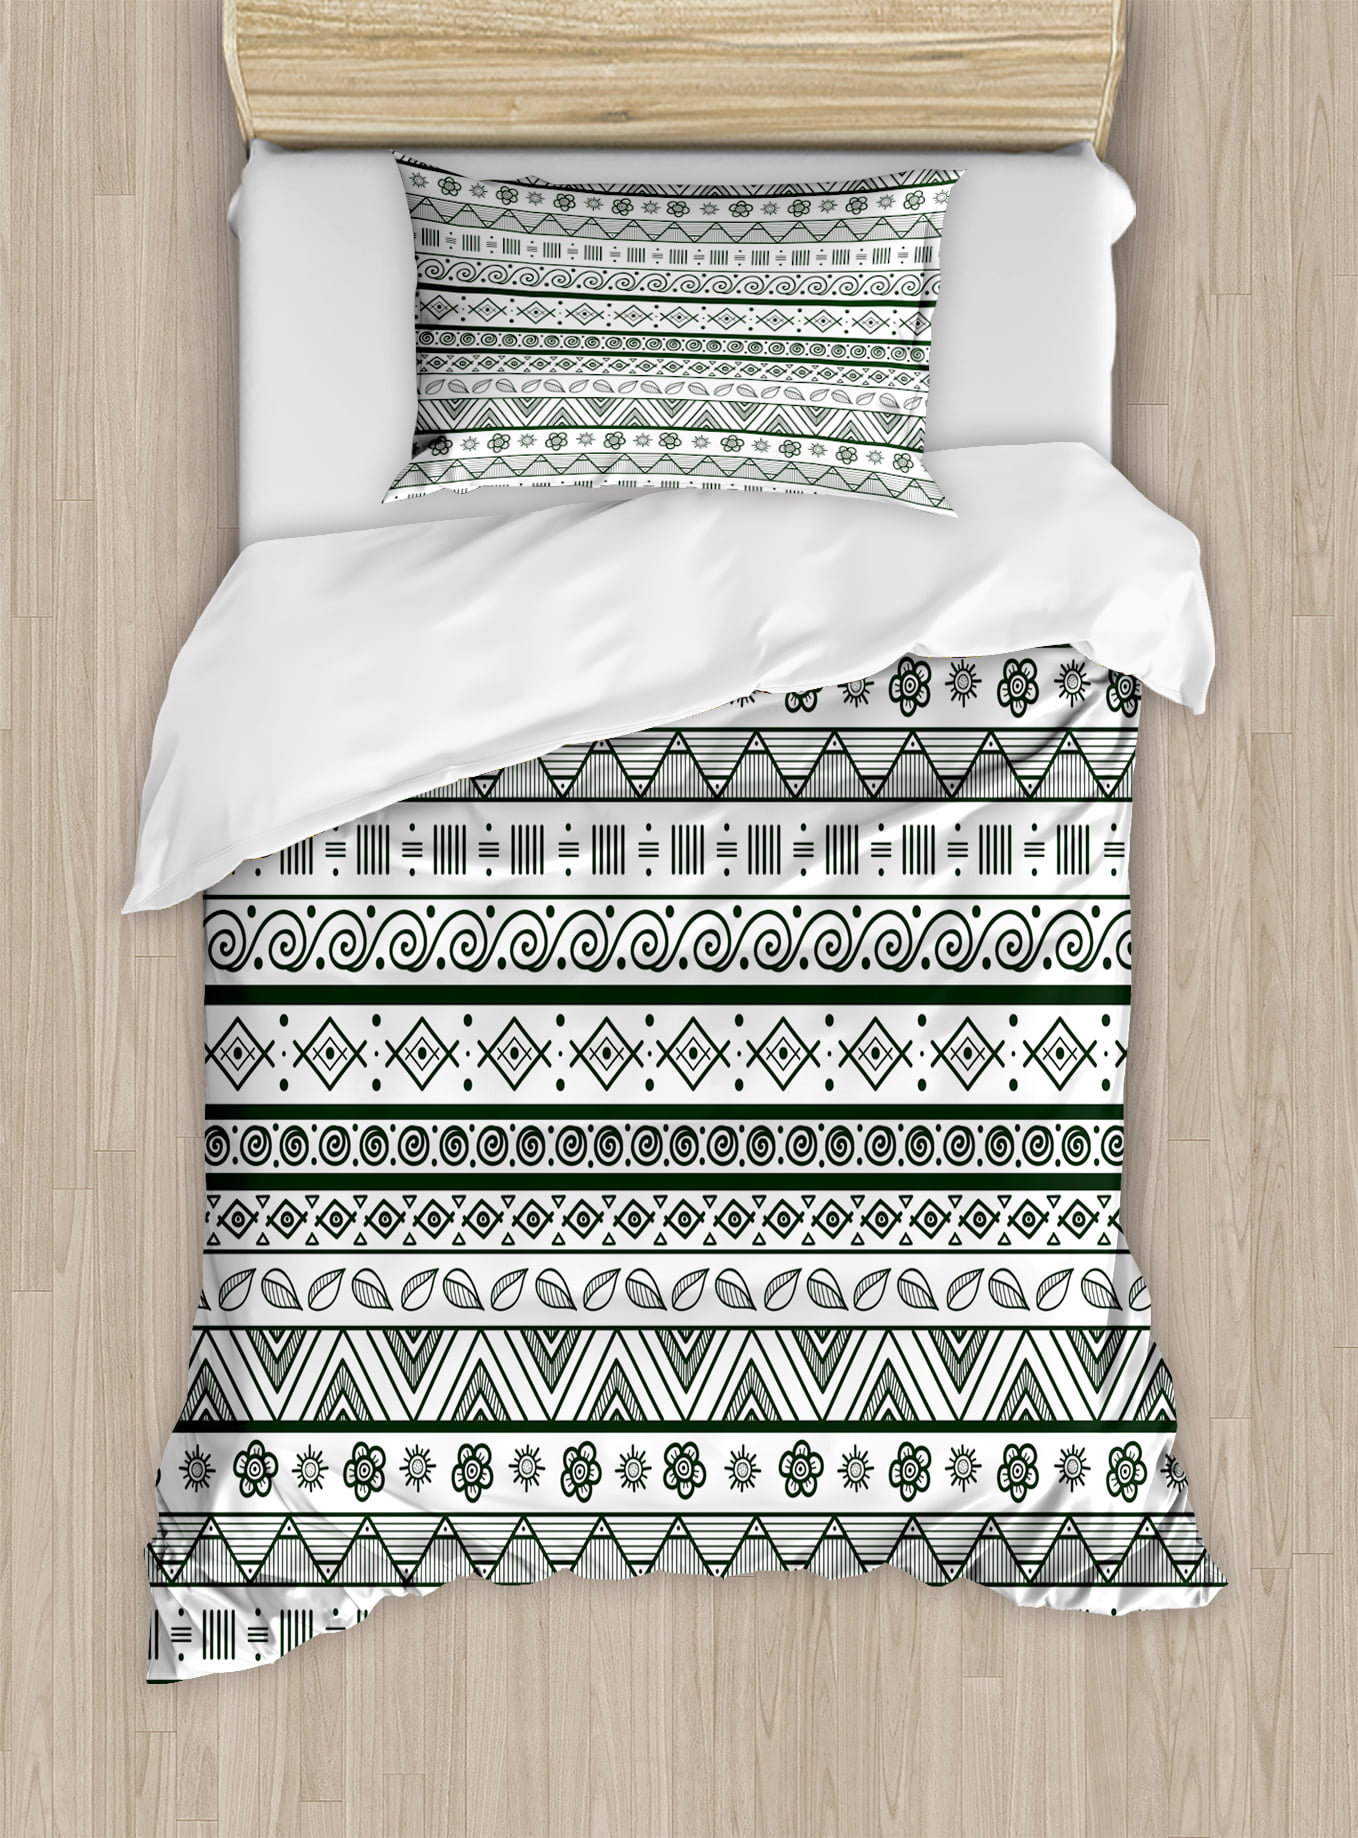 Tribal Twin Size Duvet Cover Set, Indian Aztec Pattern with Primitive ...